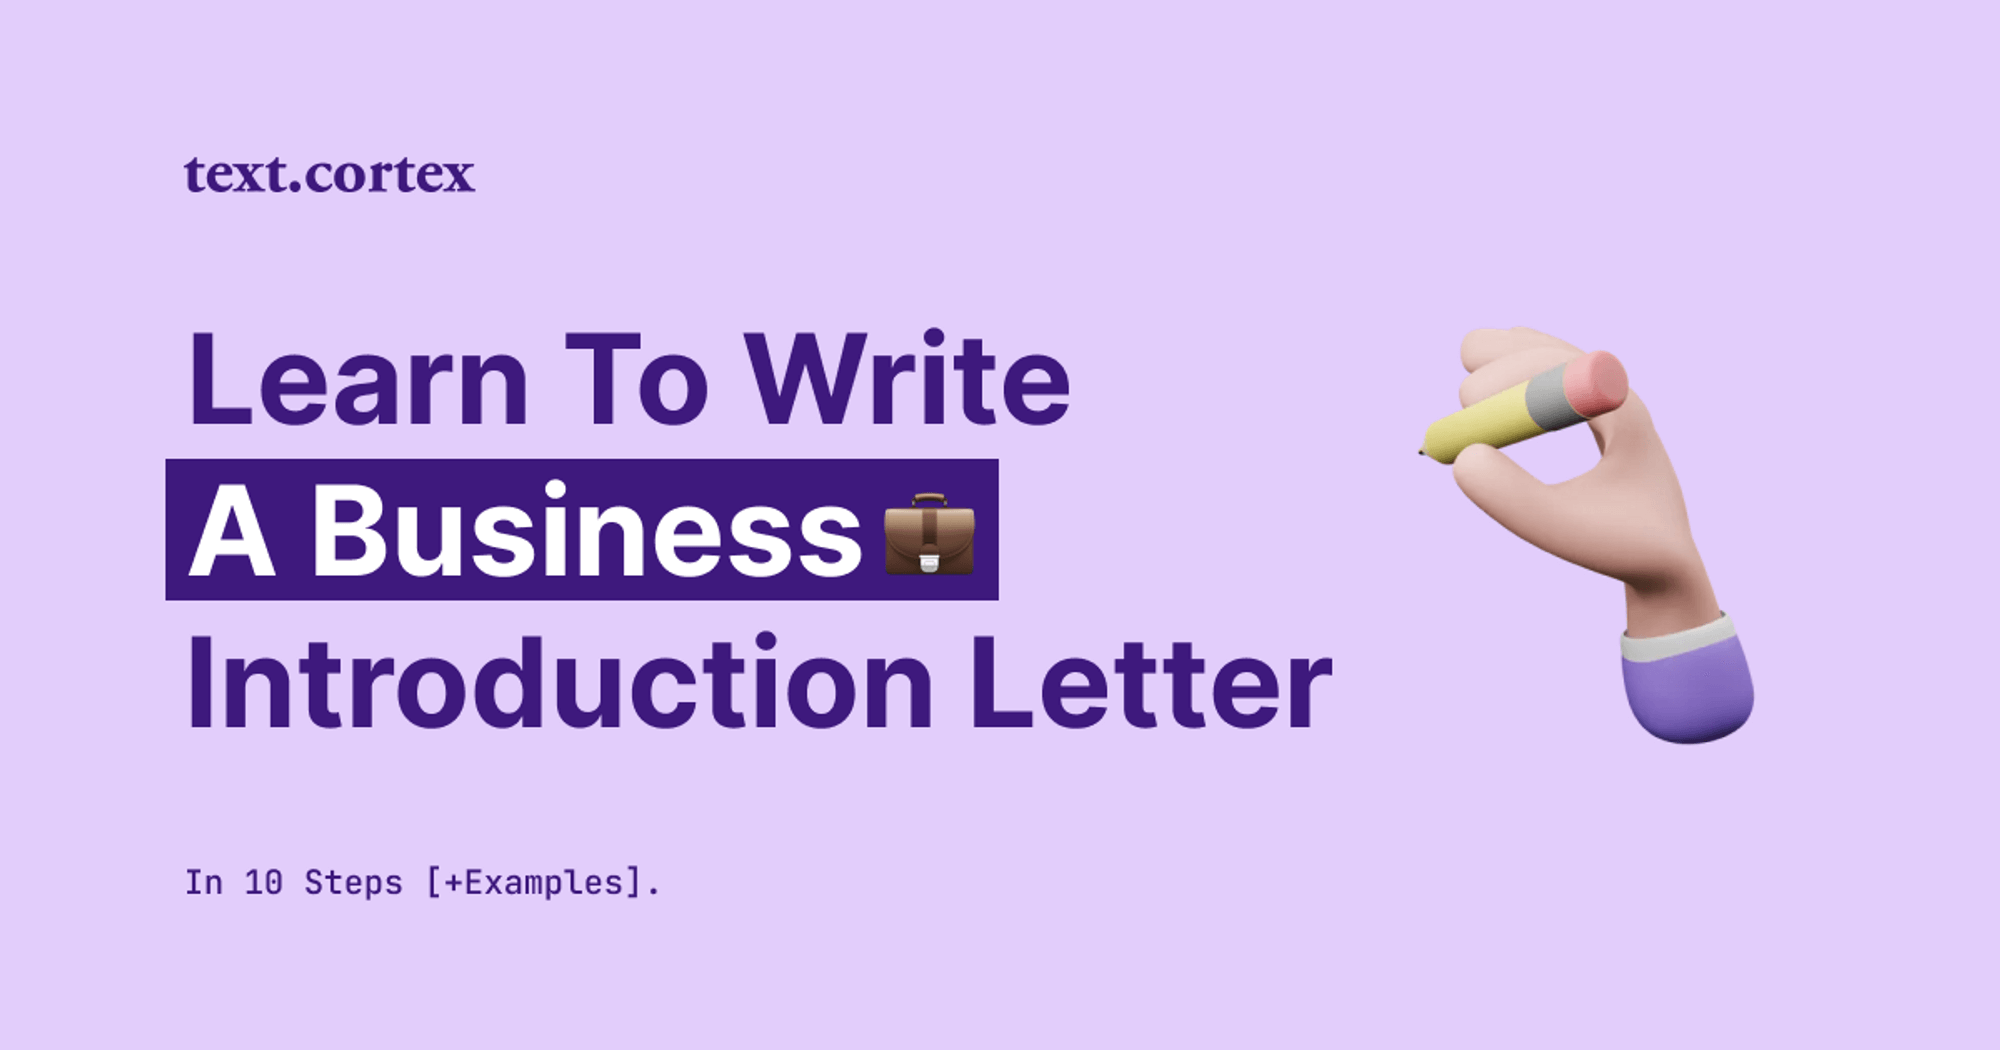 How To Write a Business Introduction Letter in 10 Steps [+Examples]